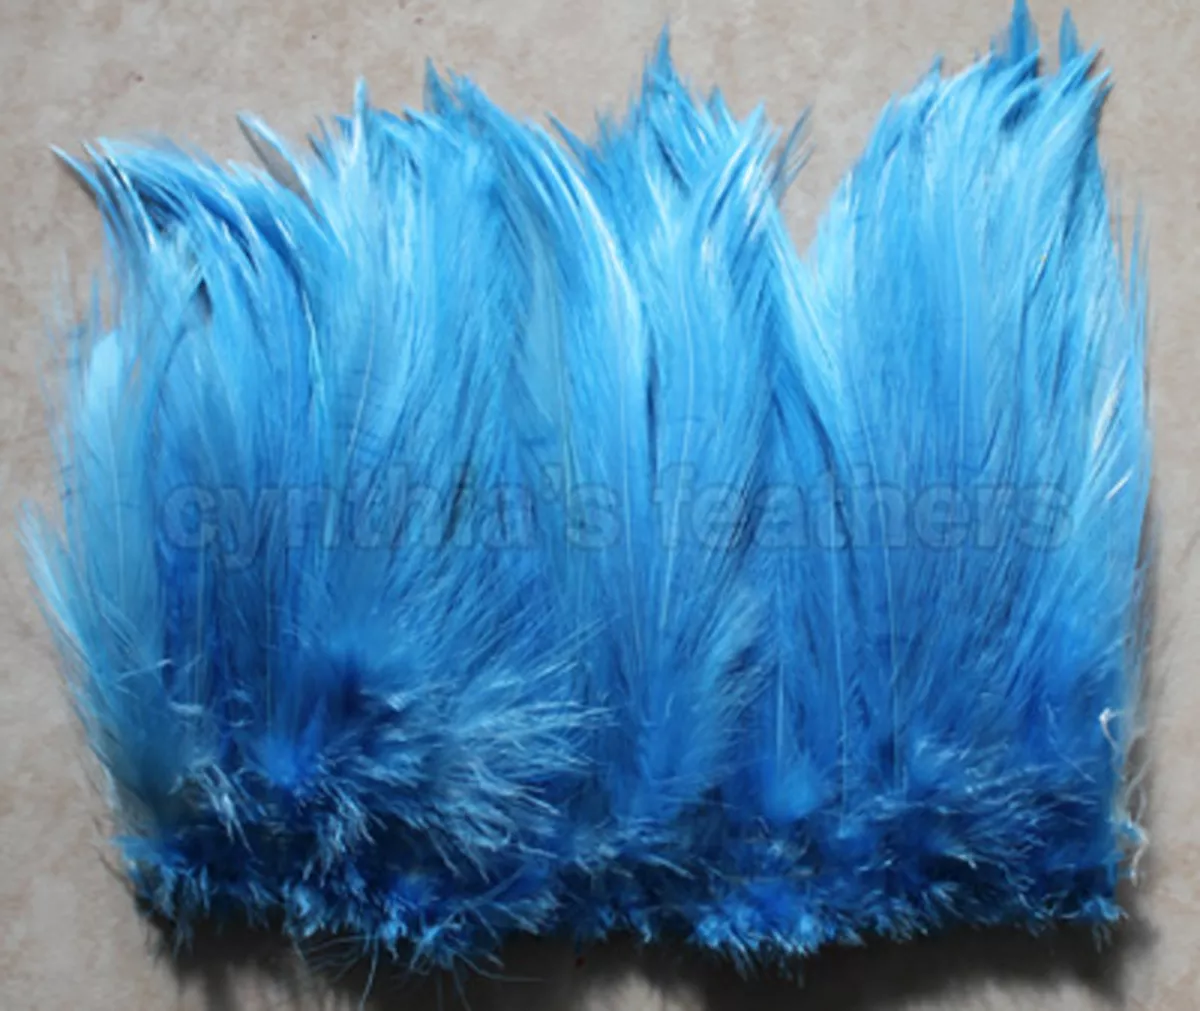 100+ (7.0g, 1/4Oz) Periwinkle 5-7 Hackle Rooster COQUE Feathers